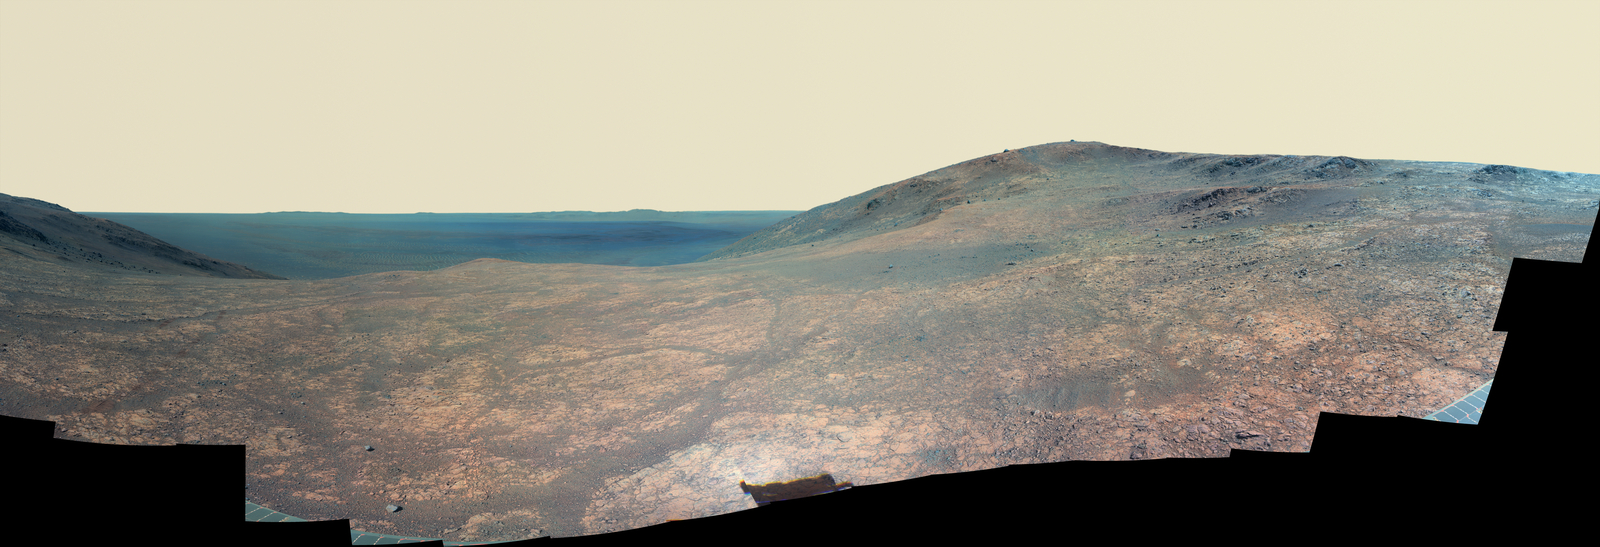 "Marathon Valley" on Mars opens to a view across Endeavour Crater in this enhanced-color version of a scene from the Pancam of NASA's Mars Exploration Rover Opportunity. The scene merges many exposures taken during April and May 2016. The foreground shows the fractured texture of the valley.